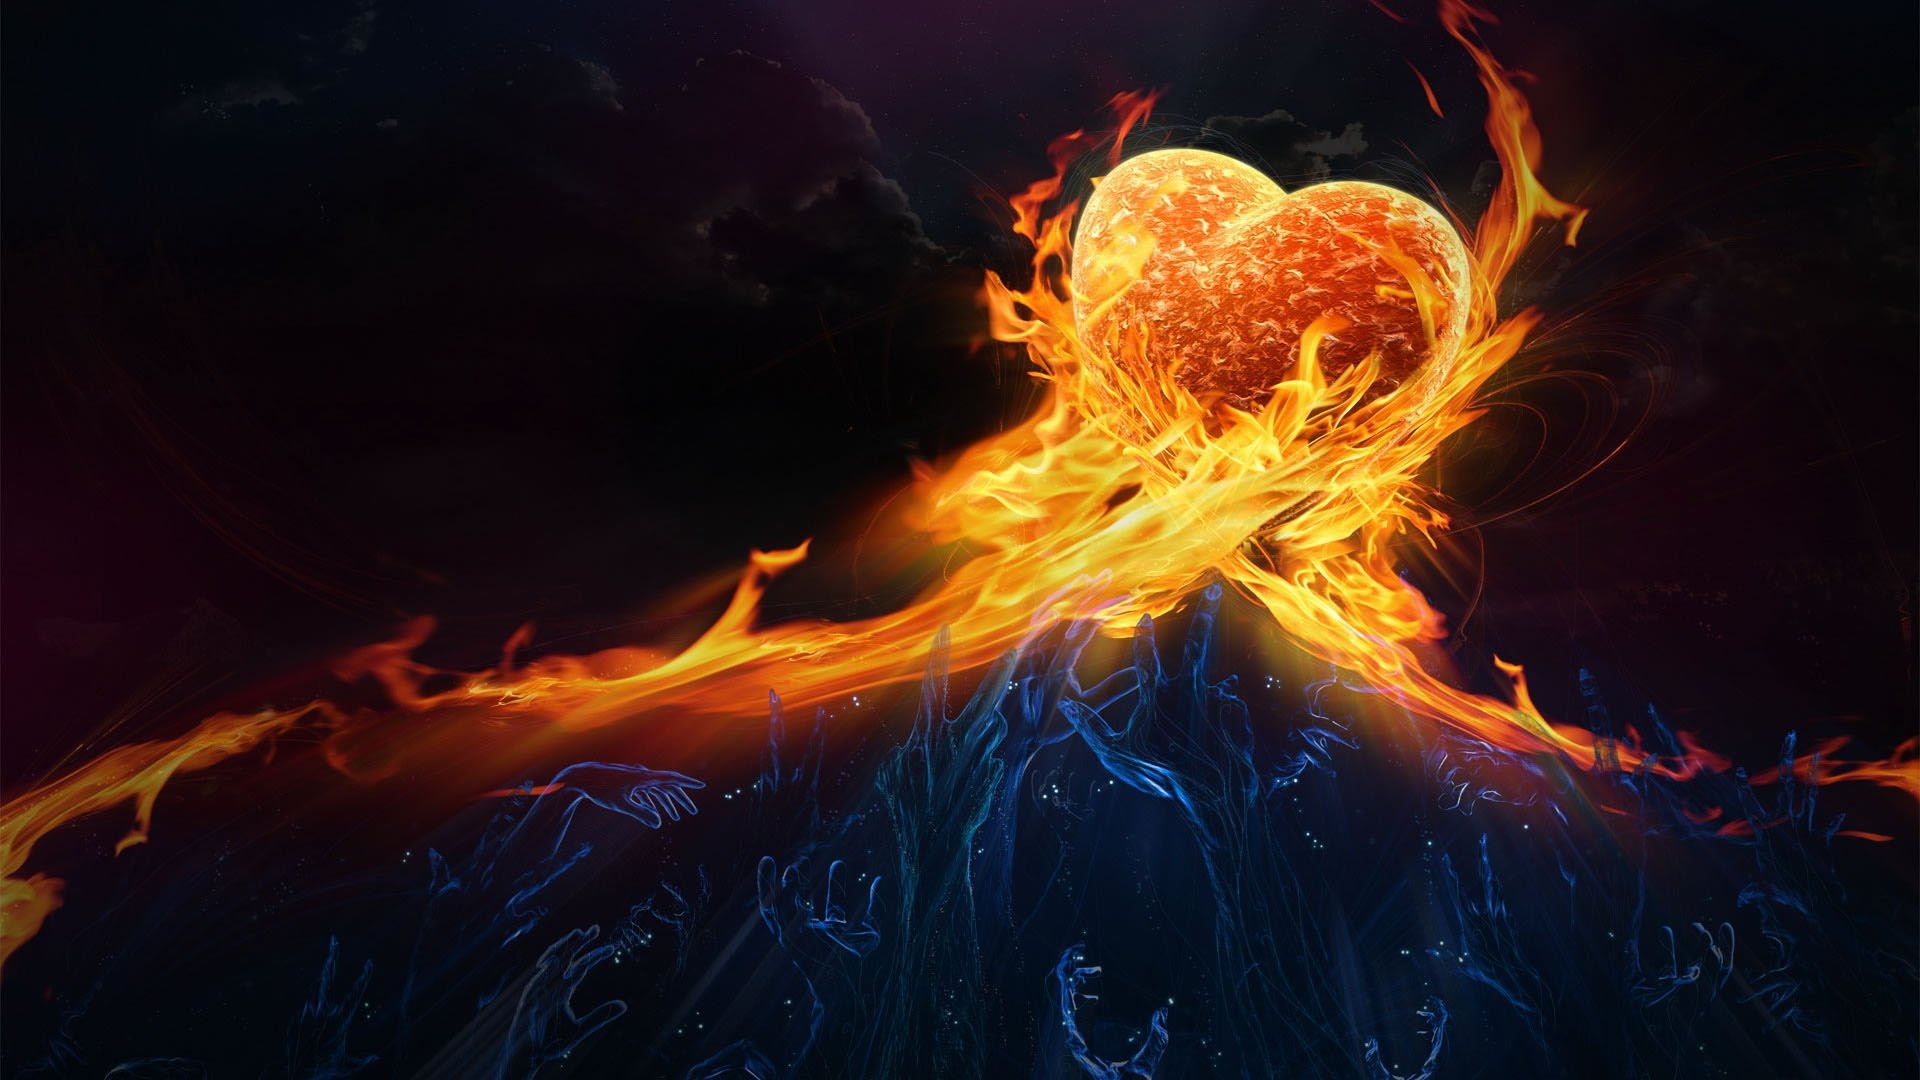  Animated Love HD Wallpapers 1920x1080   Featured On Love Wallpaper